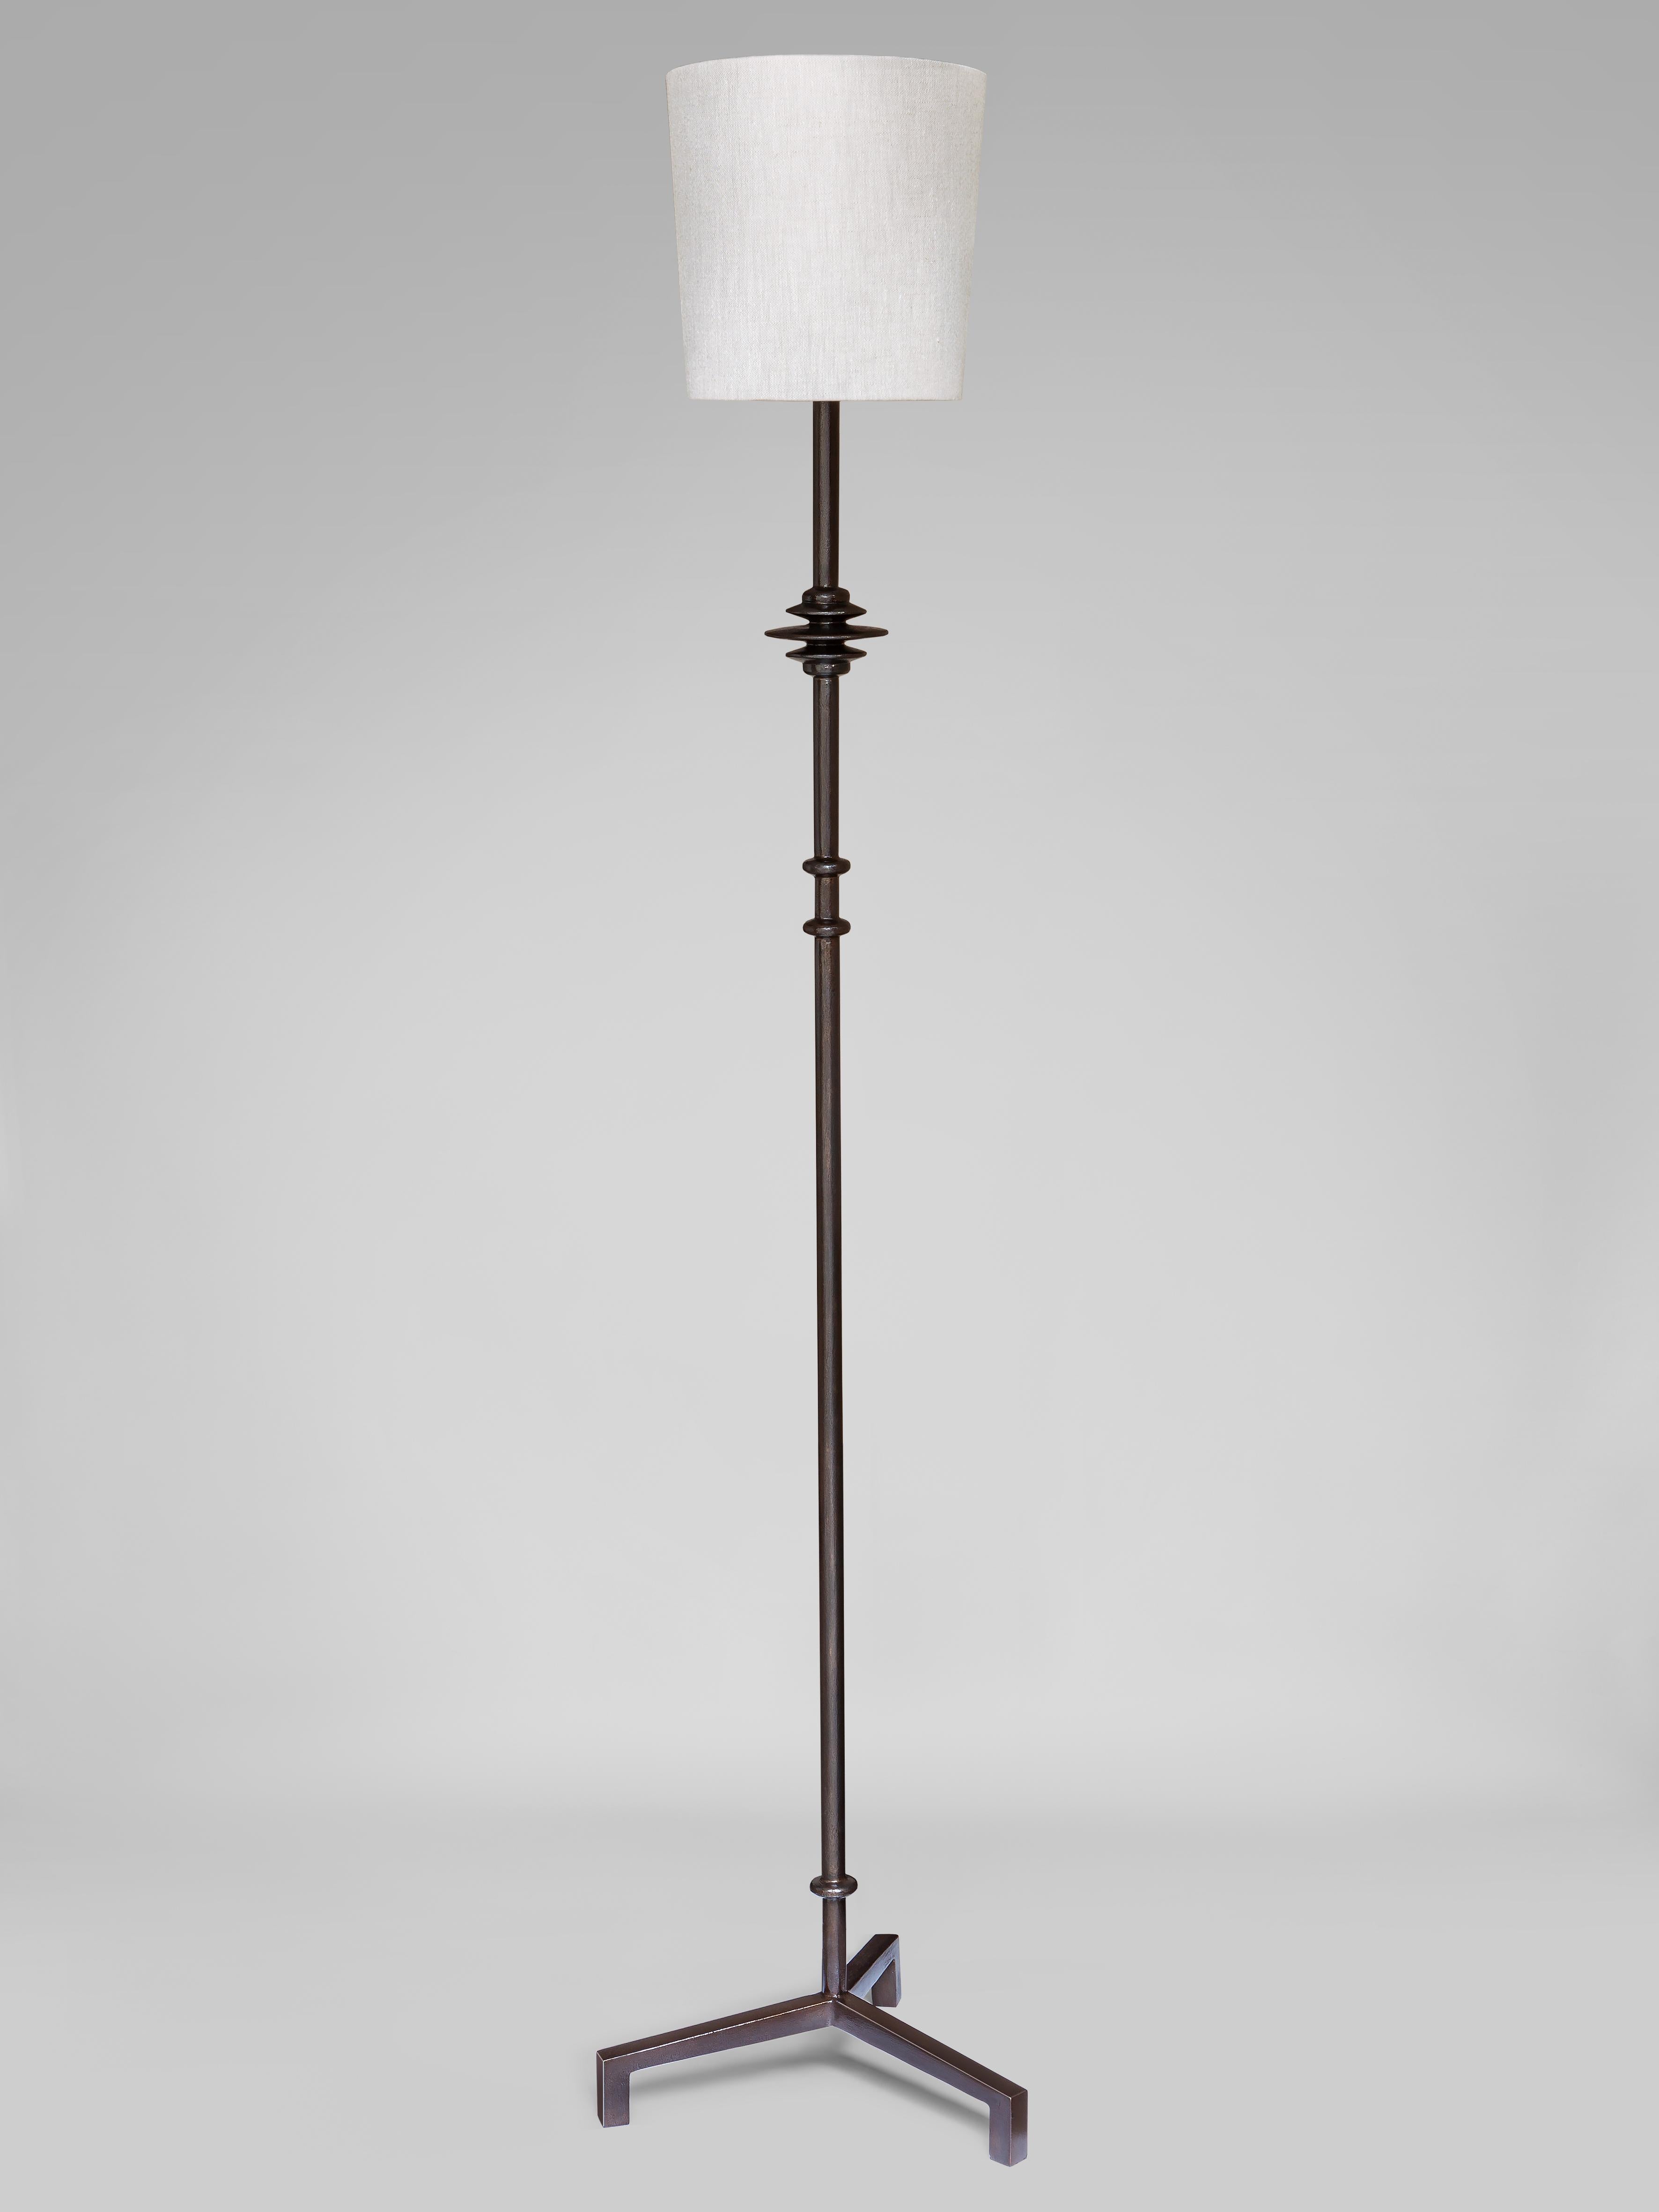 Floor lamp in hand sculpted plaster on metal armature, in the Giacometti Manner.

Lampshade not included

LAMP 1 x Candelabra bulb / 1 x E27 bulb  
*Elecrtified for the country of your choice  
*All products for the United States are assembled using